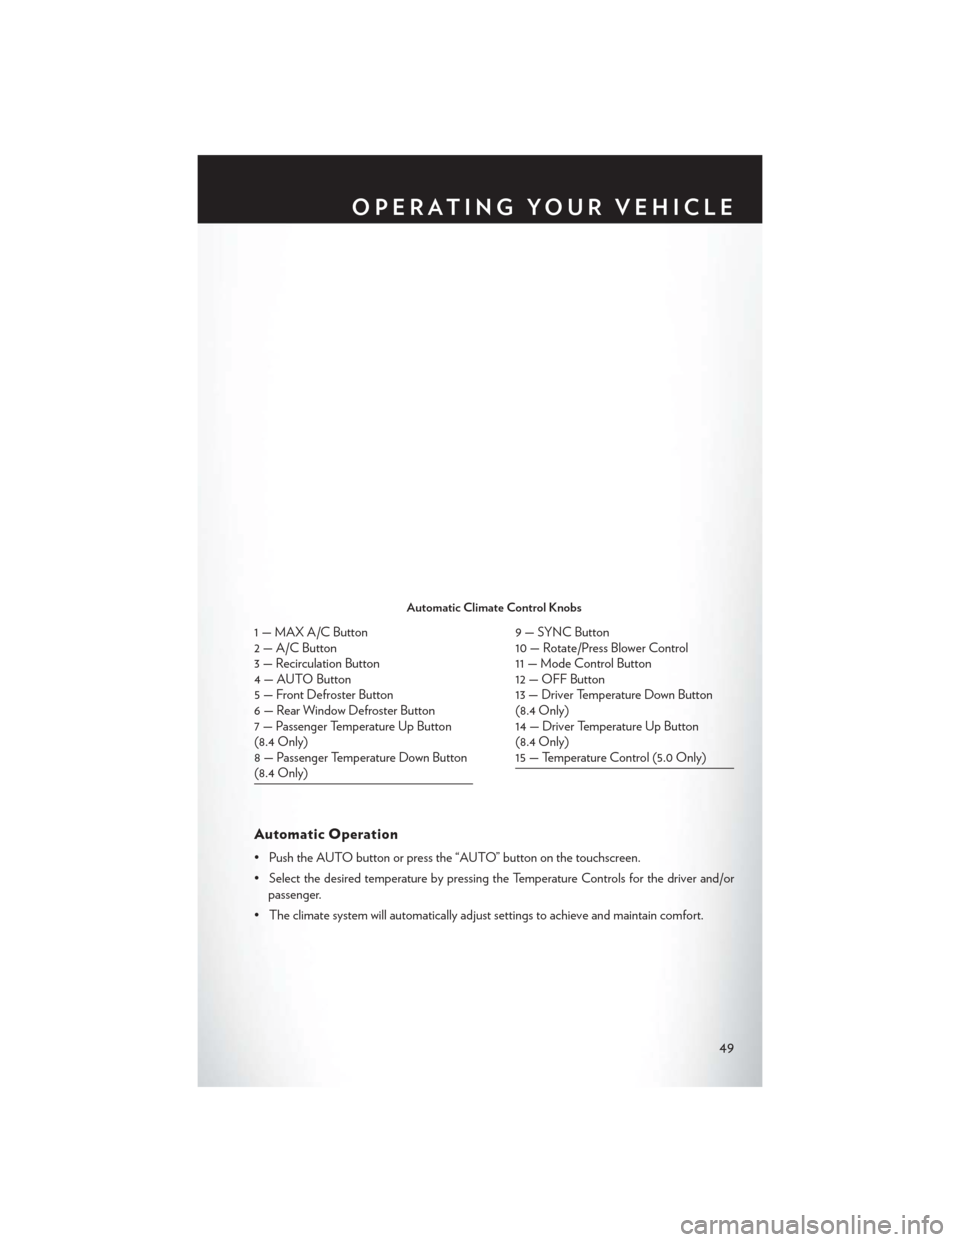 CHRYSLER 200 2015 2.G Workshop Manual Automatic Operation
• Push the AUTO button or press the “AUTO” button on the touchscreen.
• Select the desired temperature by pressing the Temperature Controls for the driver and/orpassenger.
